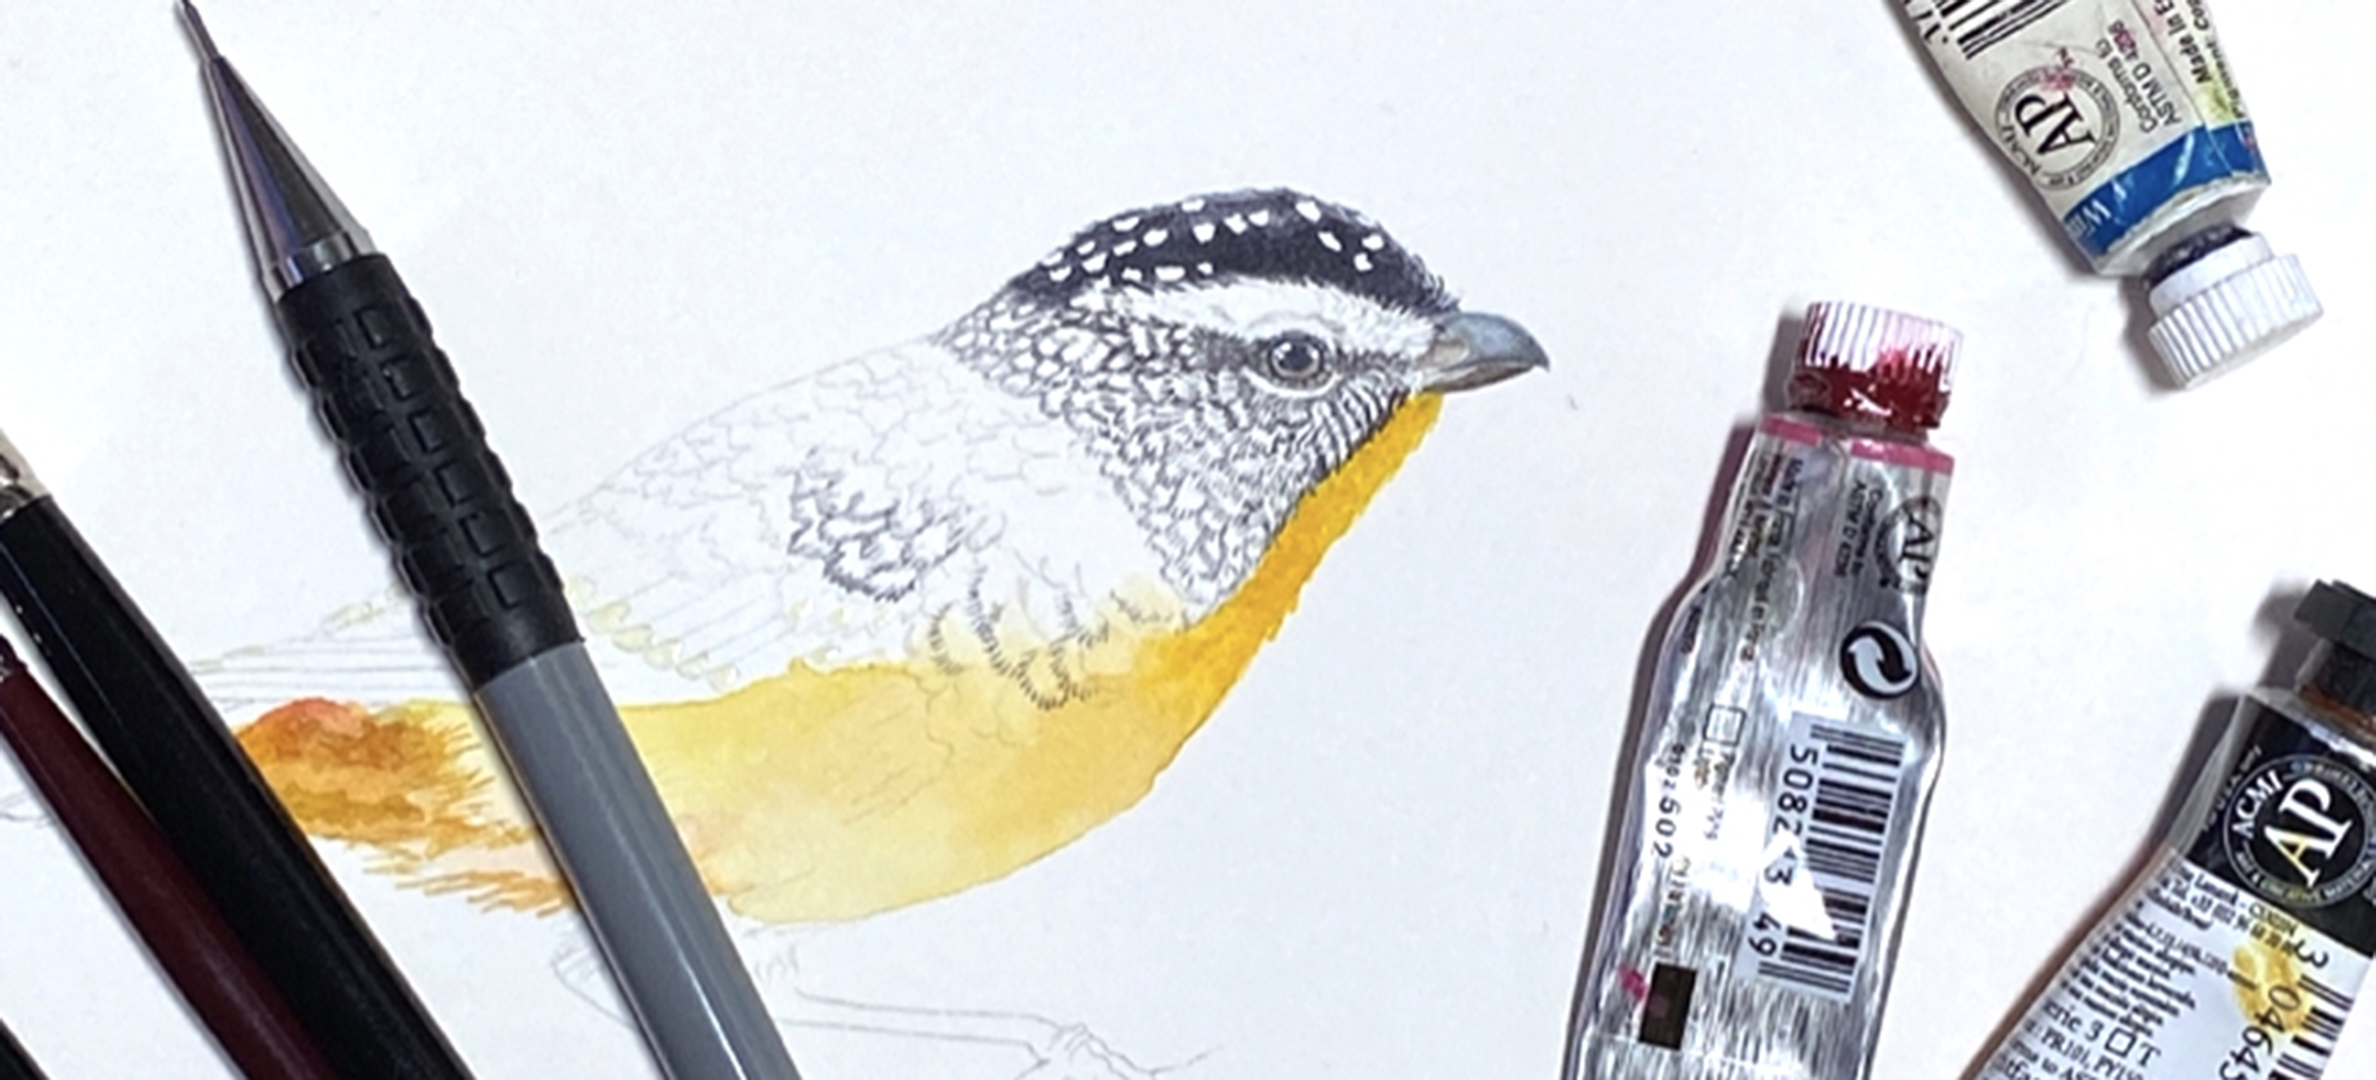 Paint A Spotted Pardalote – Workshop With David Reynolds